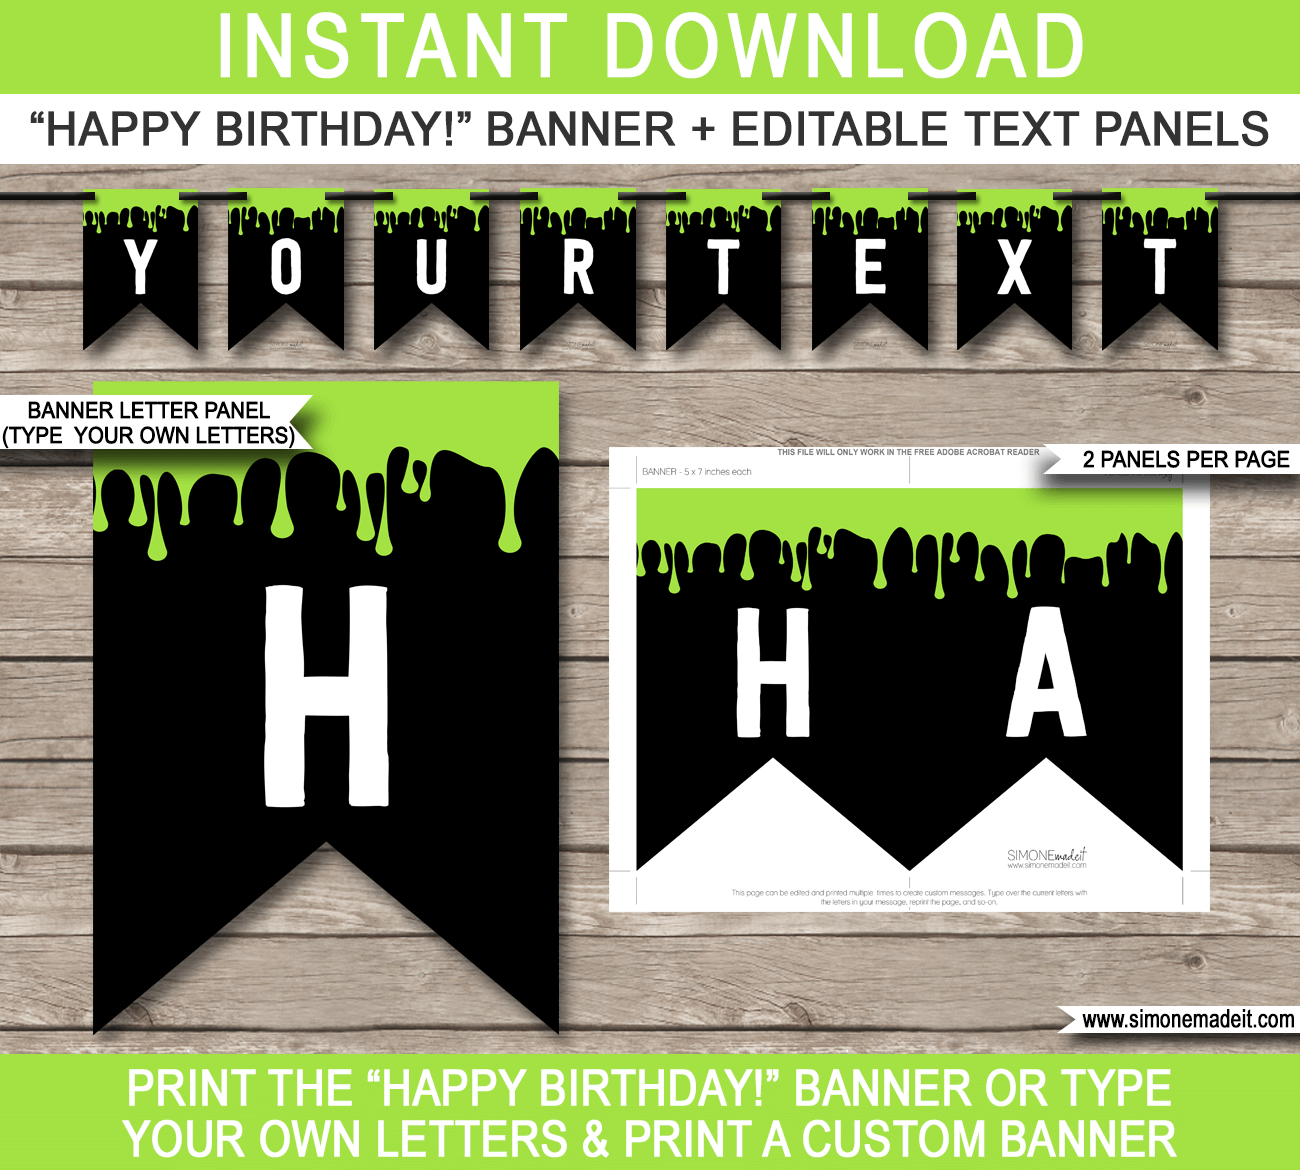 Slime Party Pennant Banner Template - Slime Bunting - Happy Birthday Banner - Slime Birthday Party Theme - Editable and Printable DIY Template - INSTANT DOWNLOAD via simonemadeit.com